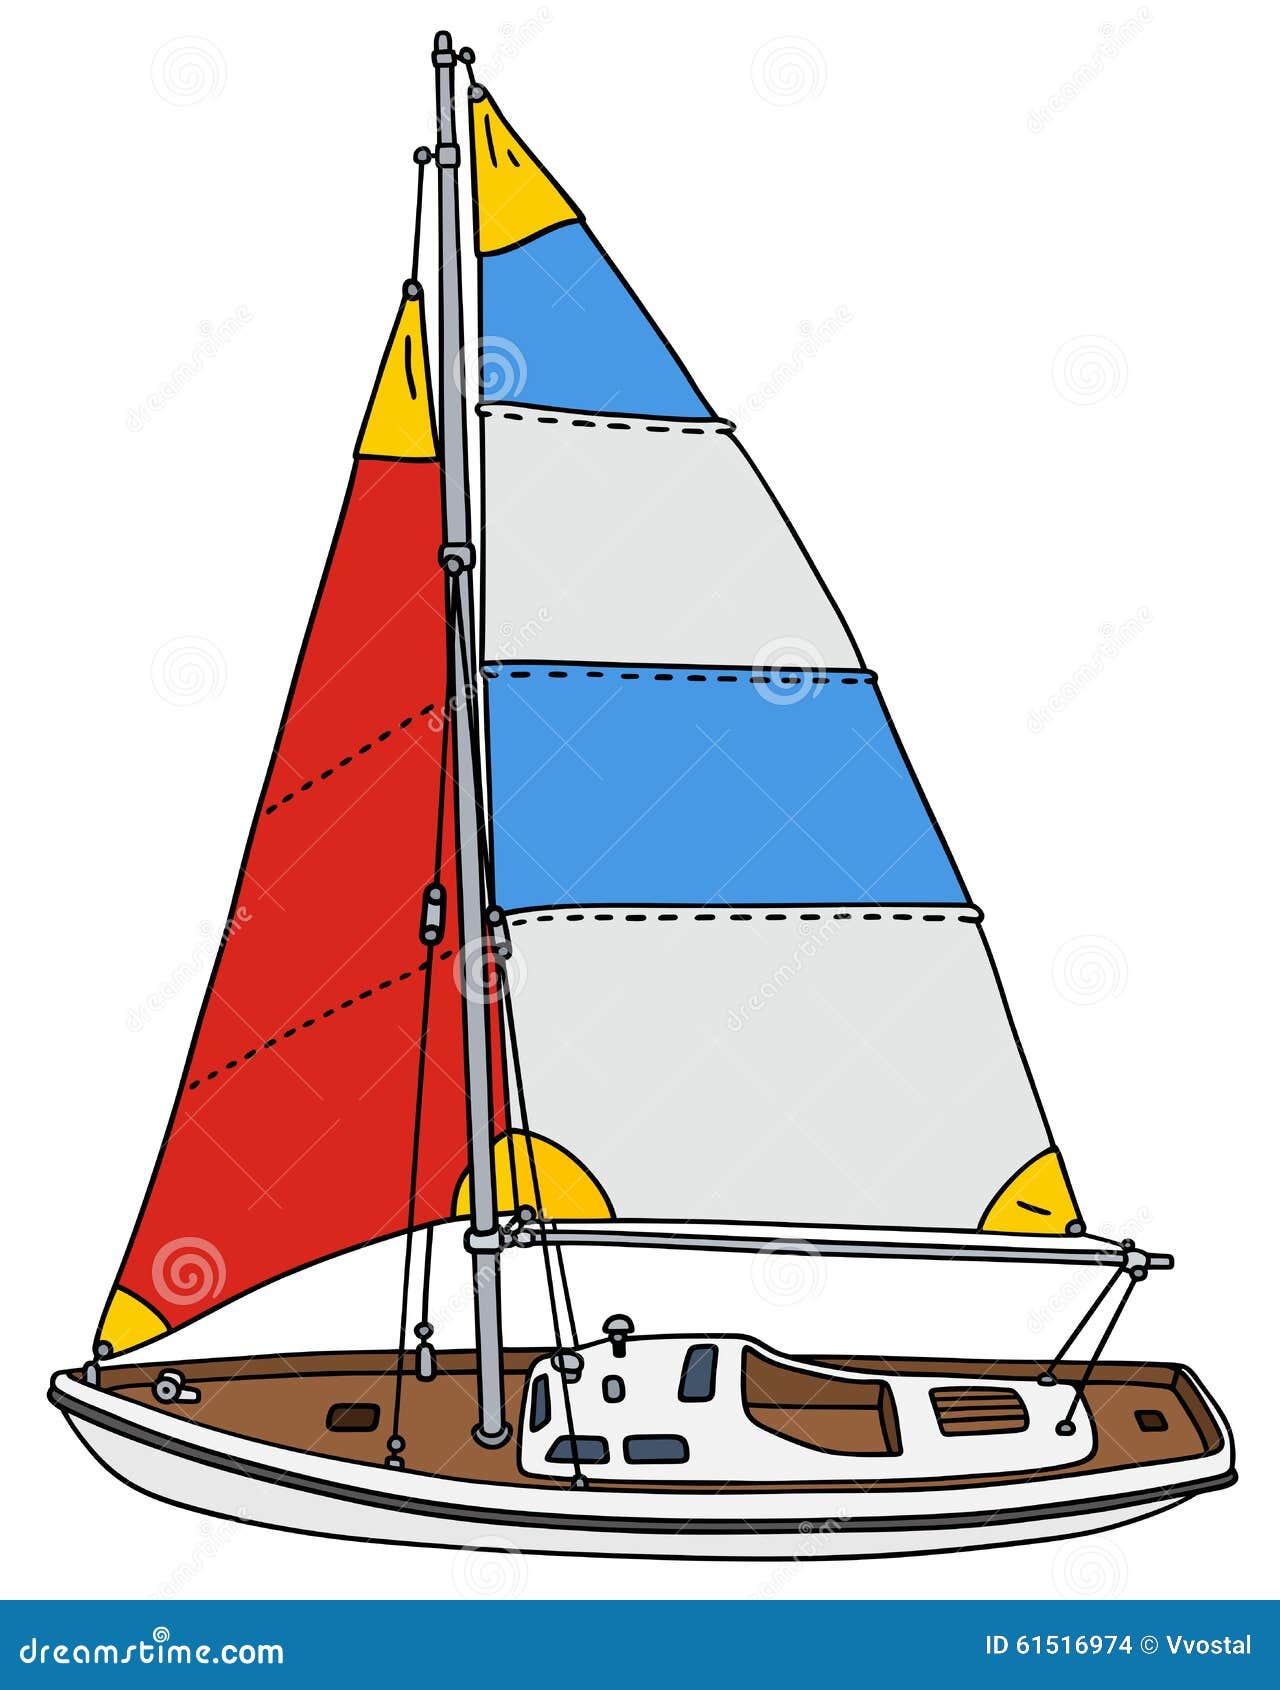 Color Small Sailing Yacht Stock Vector - Image: 61516974